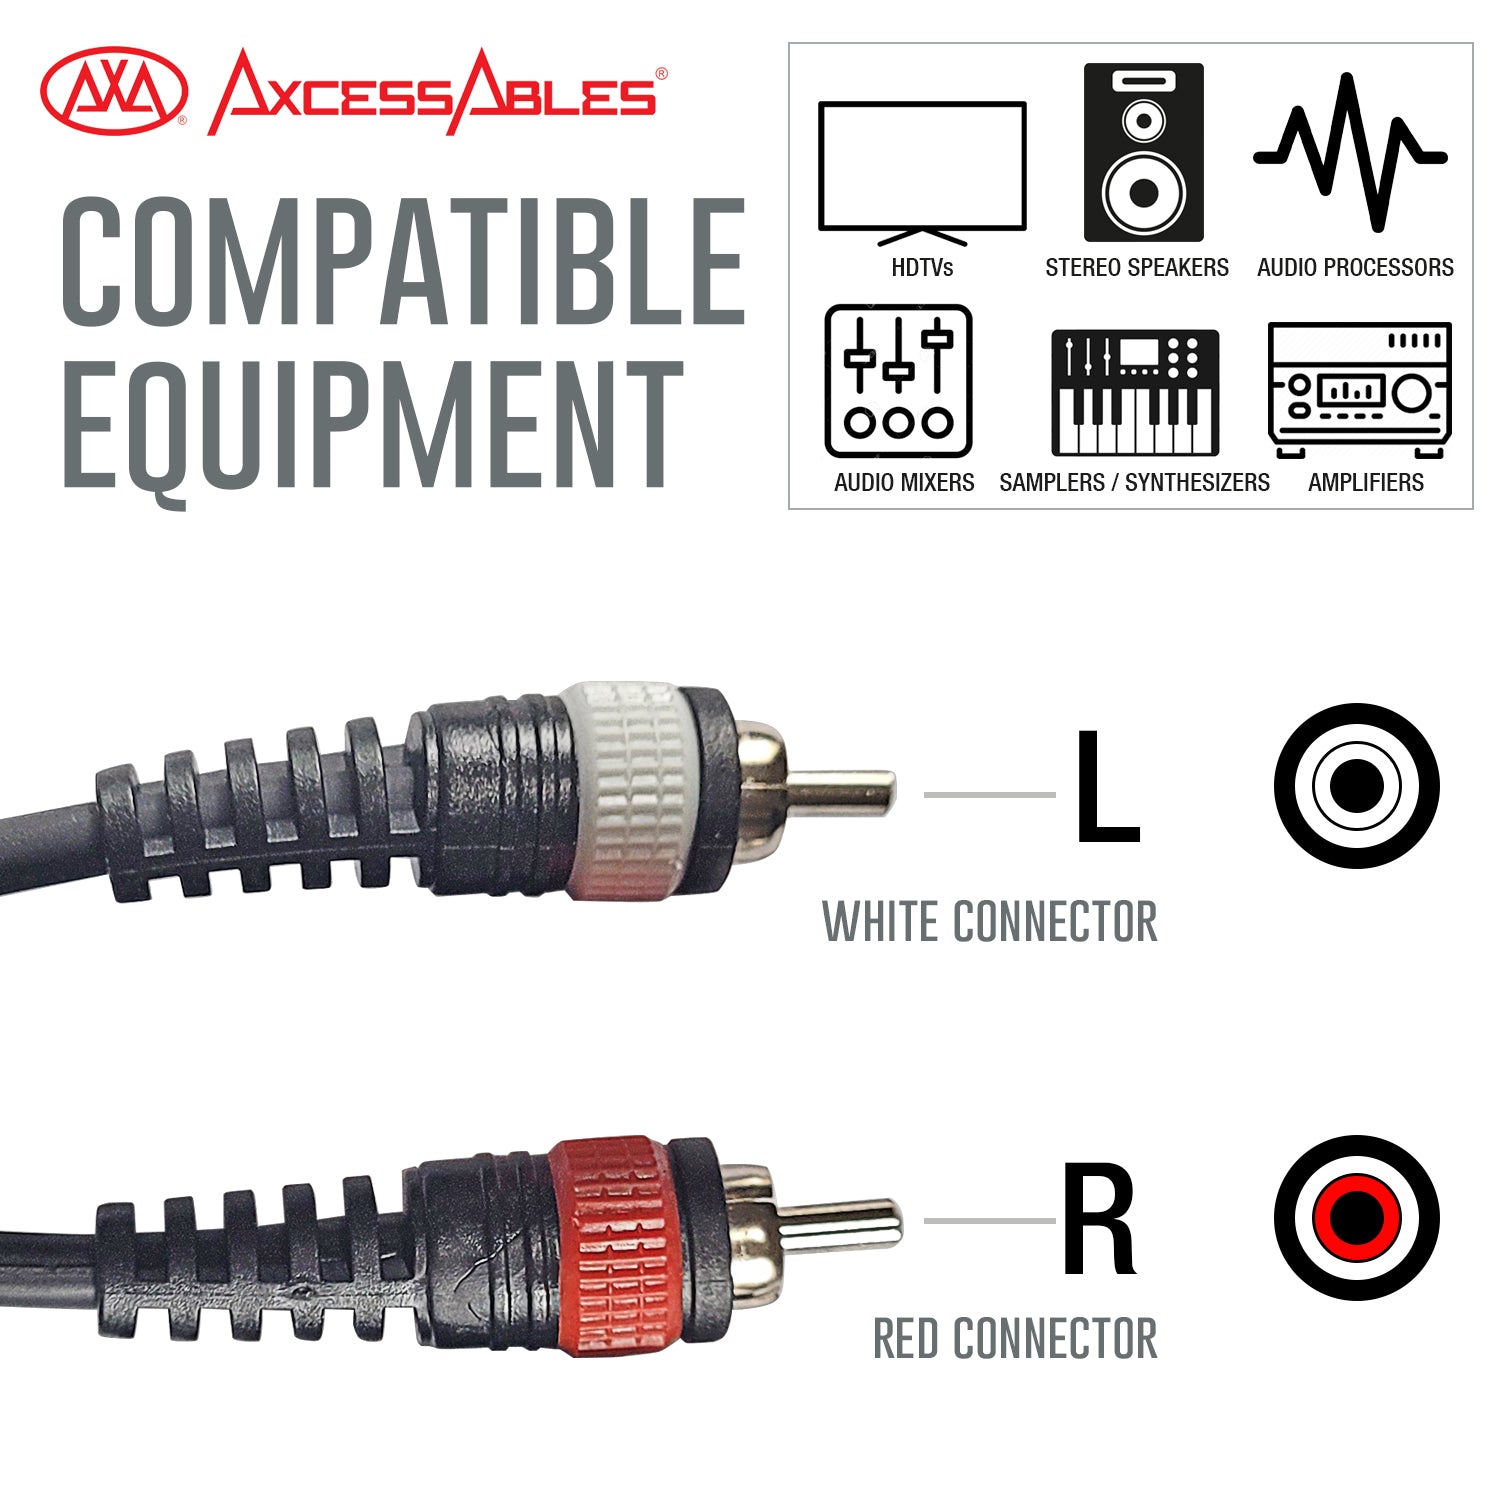 AxcessAbles Dual 1/4 Inch TS to Dual RCA Audio Interconnect Cable 10ft - 2 Pack | Dual 6.35mm Male Jack to Dual RCA | 10ft DTRS to DRCA Unbalanced Patch Cables (2-Pack)